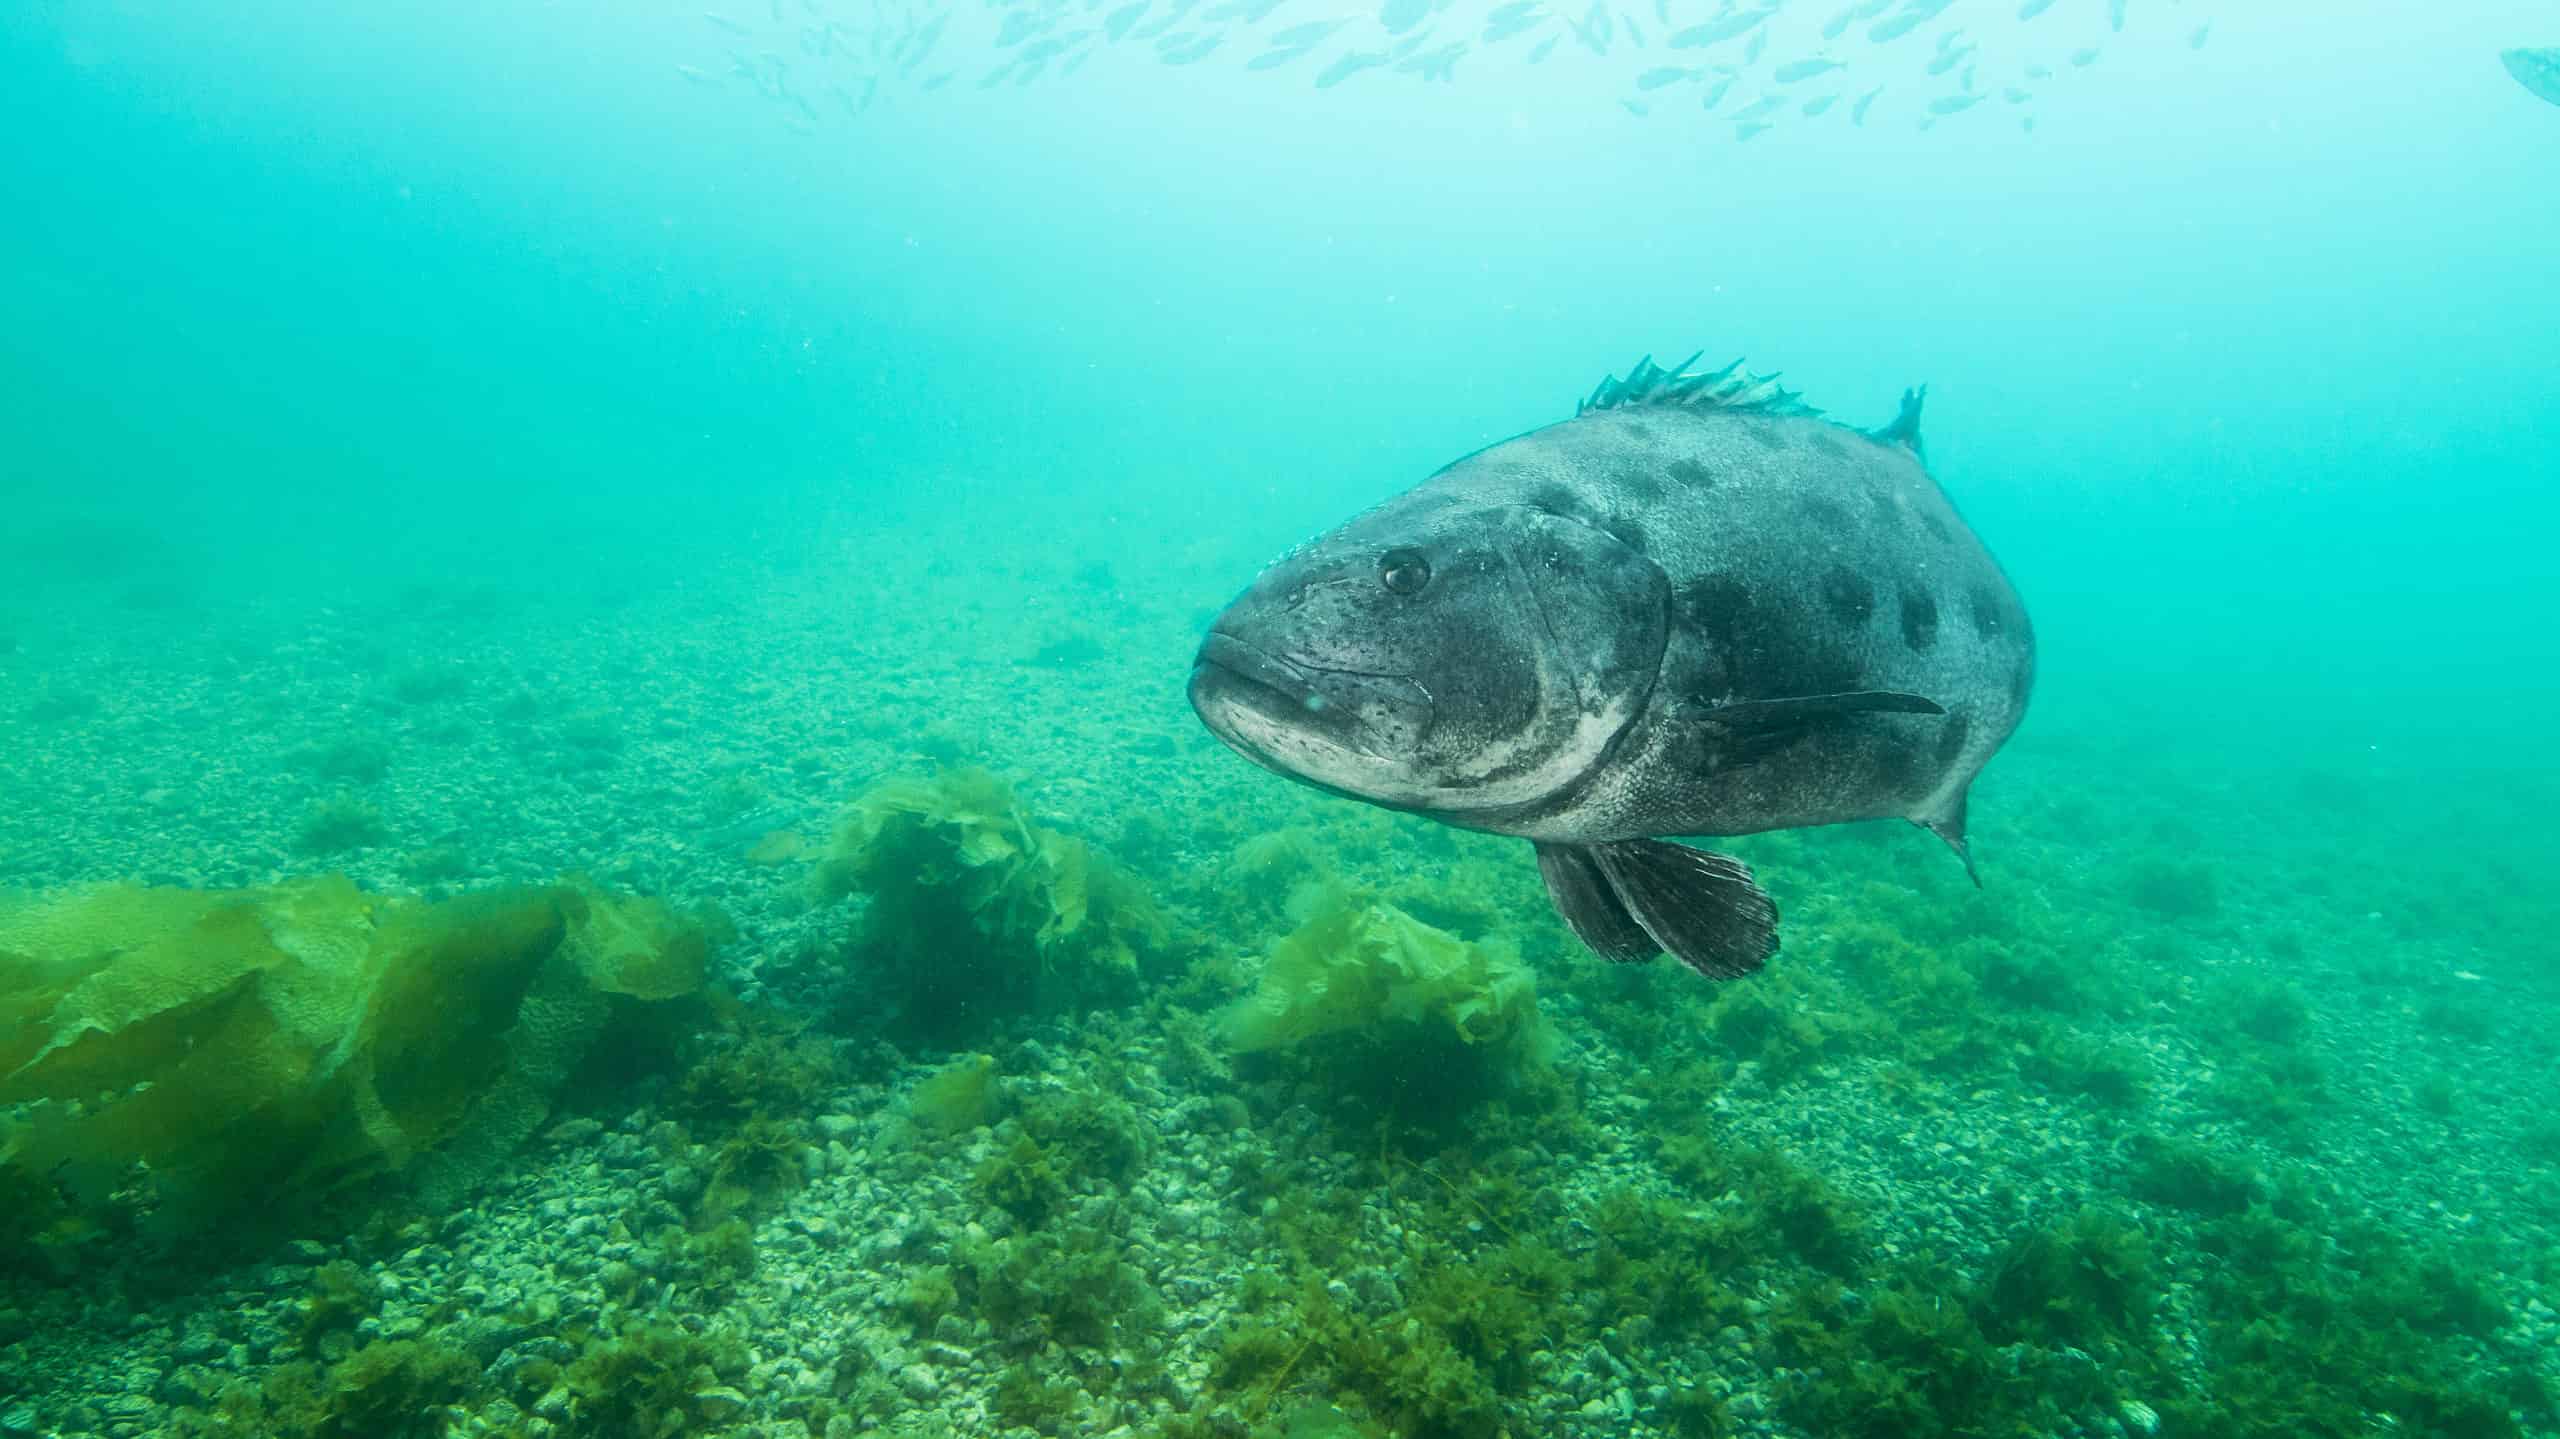 Black sea bass in green and blue water